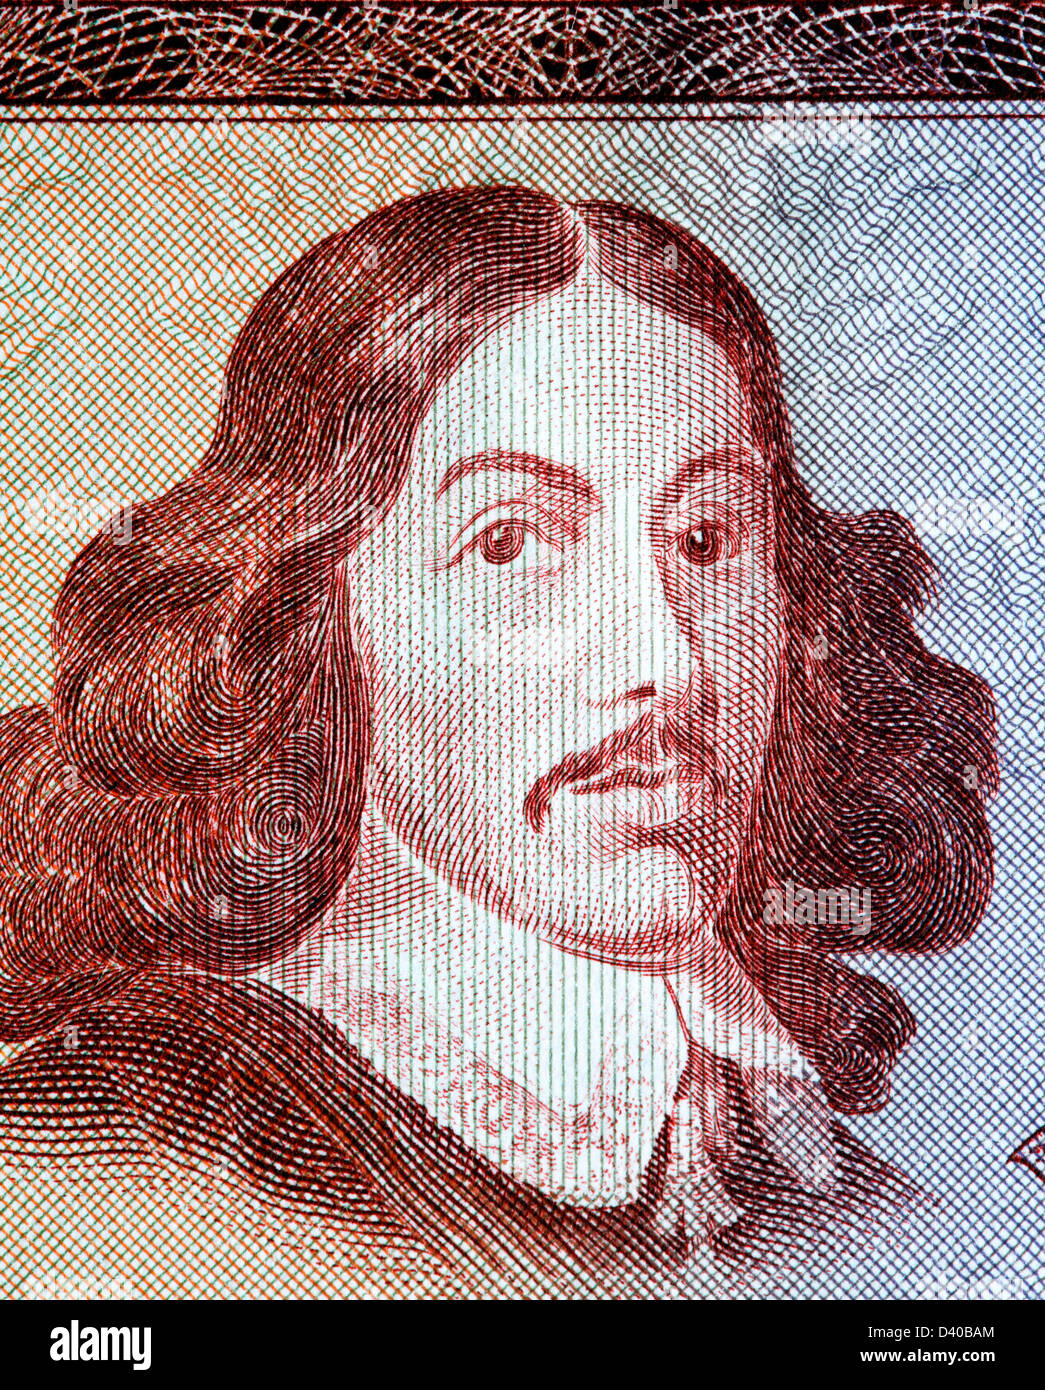 Portrait of Jan van Riebeeck from 1 Rand banknote, South Africa, 1967 Stock Photo